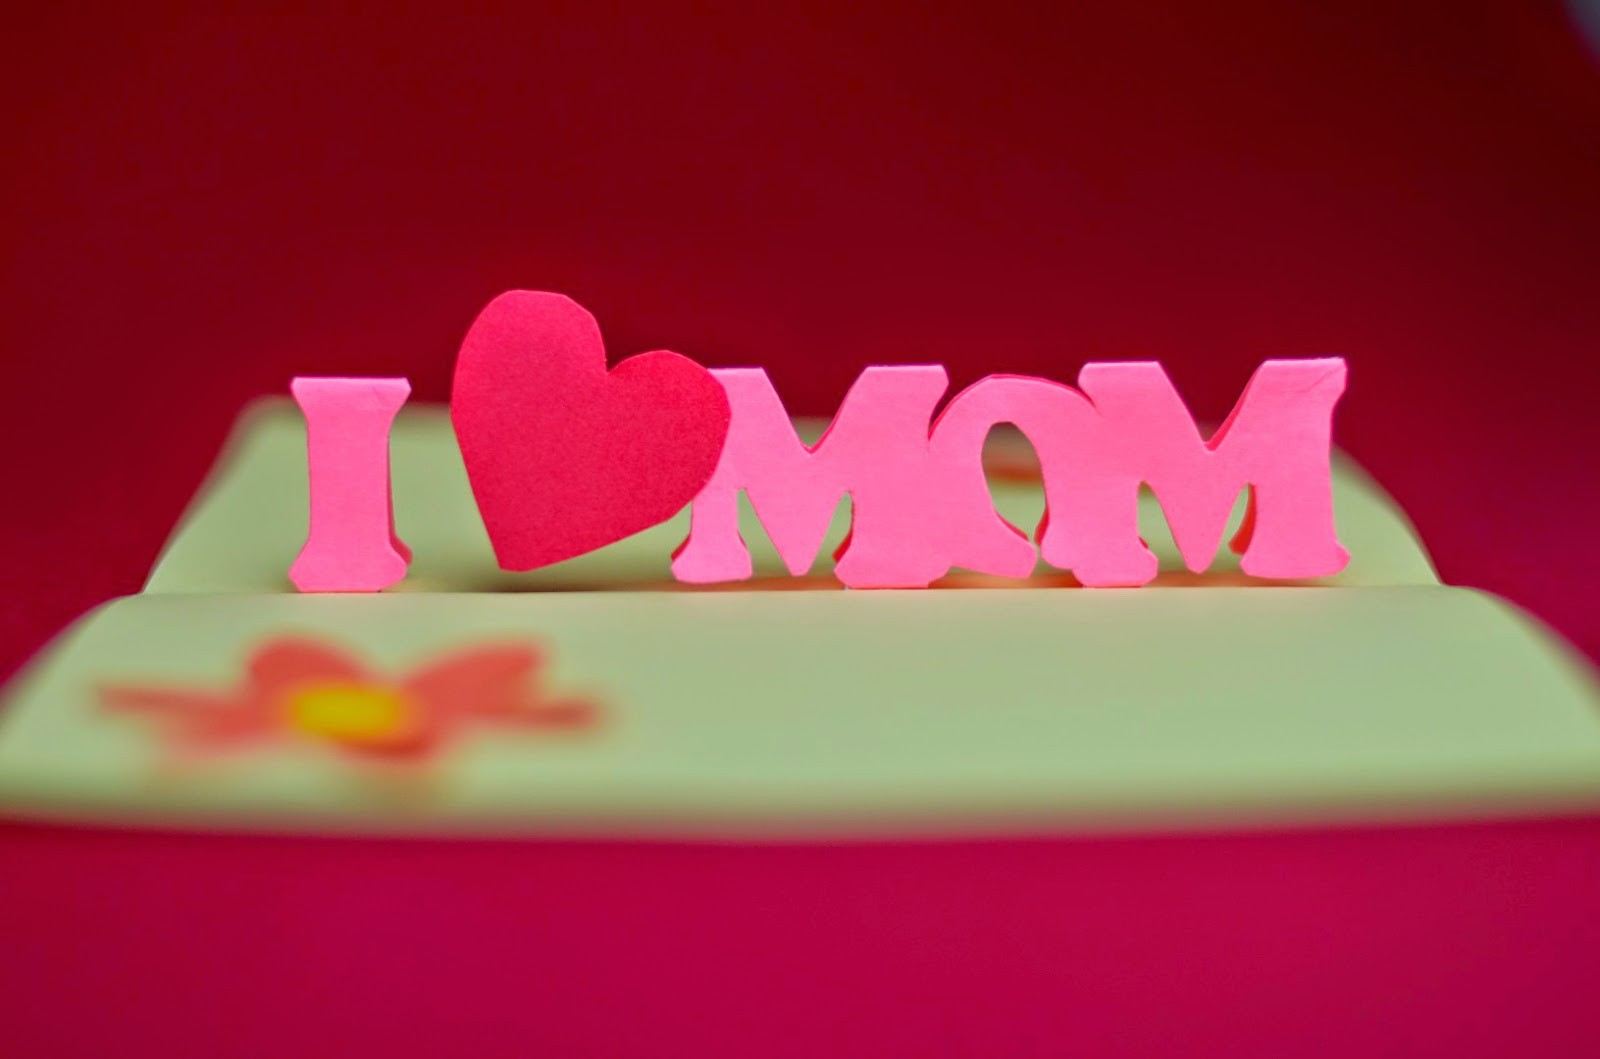 Mother's Day HD Wallpapers